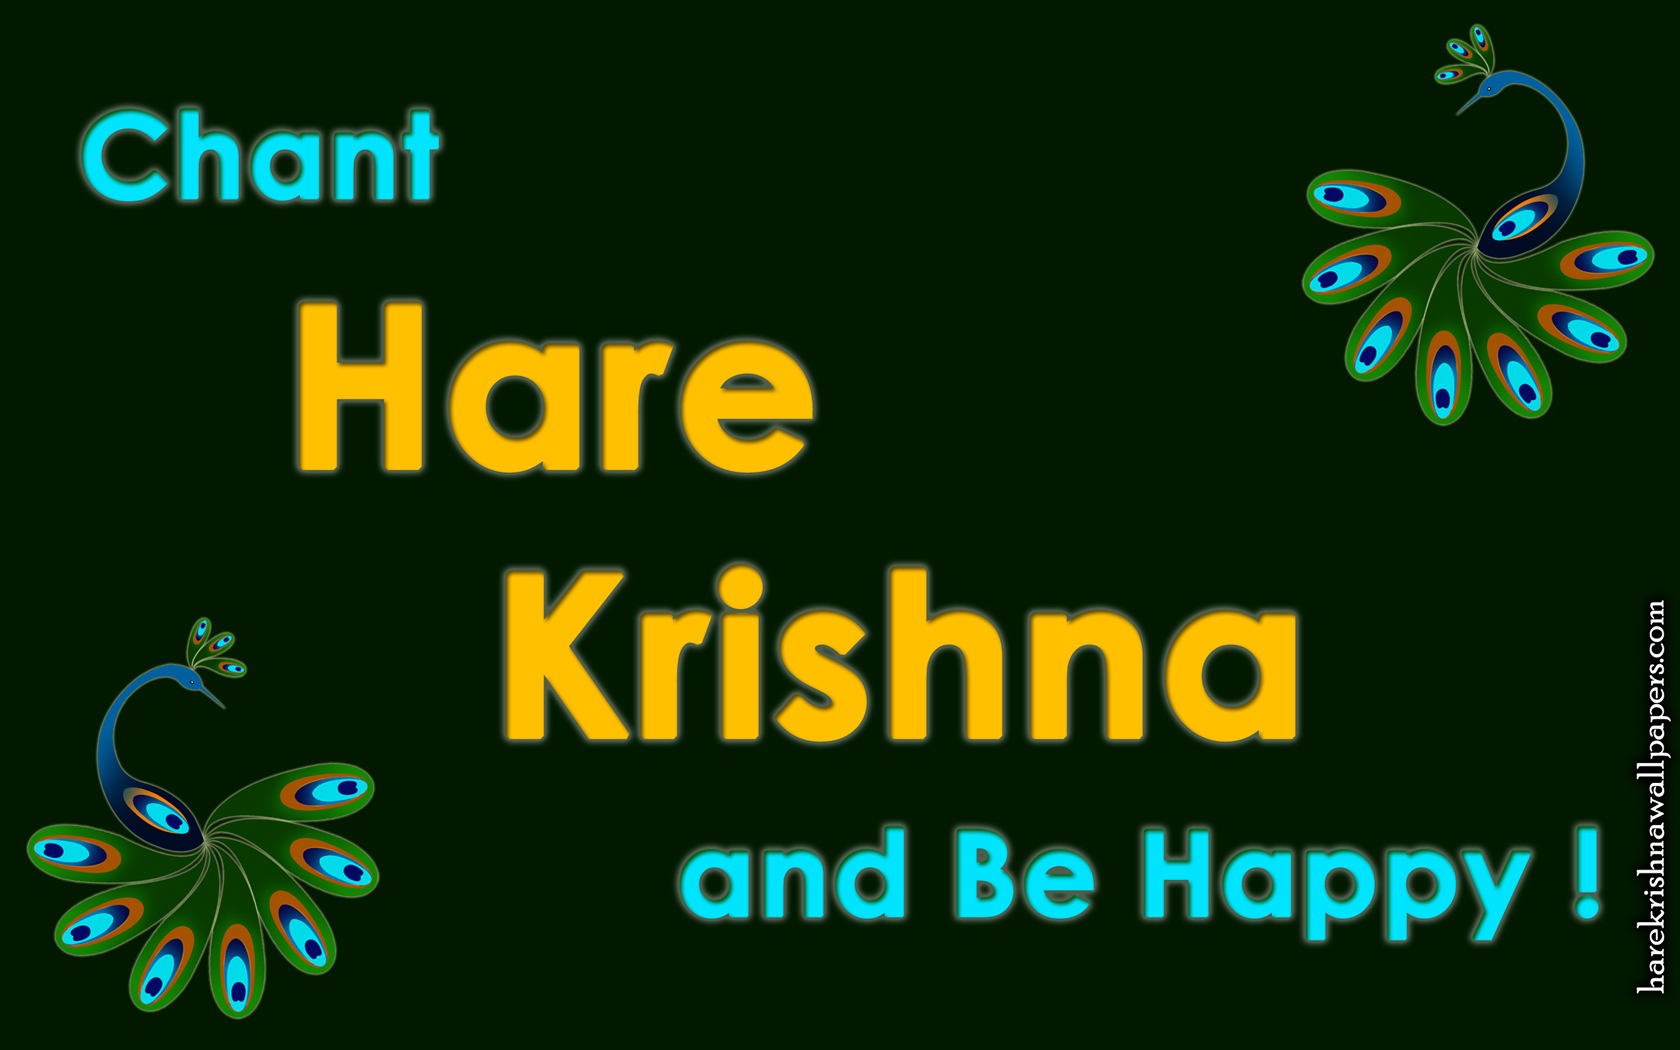 Chant Hare Krishna and be happy Wallpaper (006) Size 1680x1050 Download